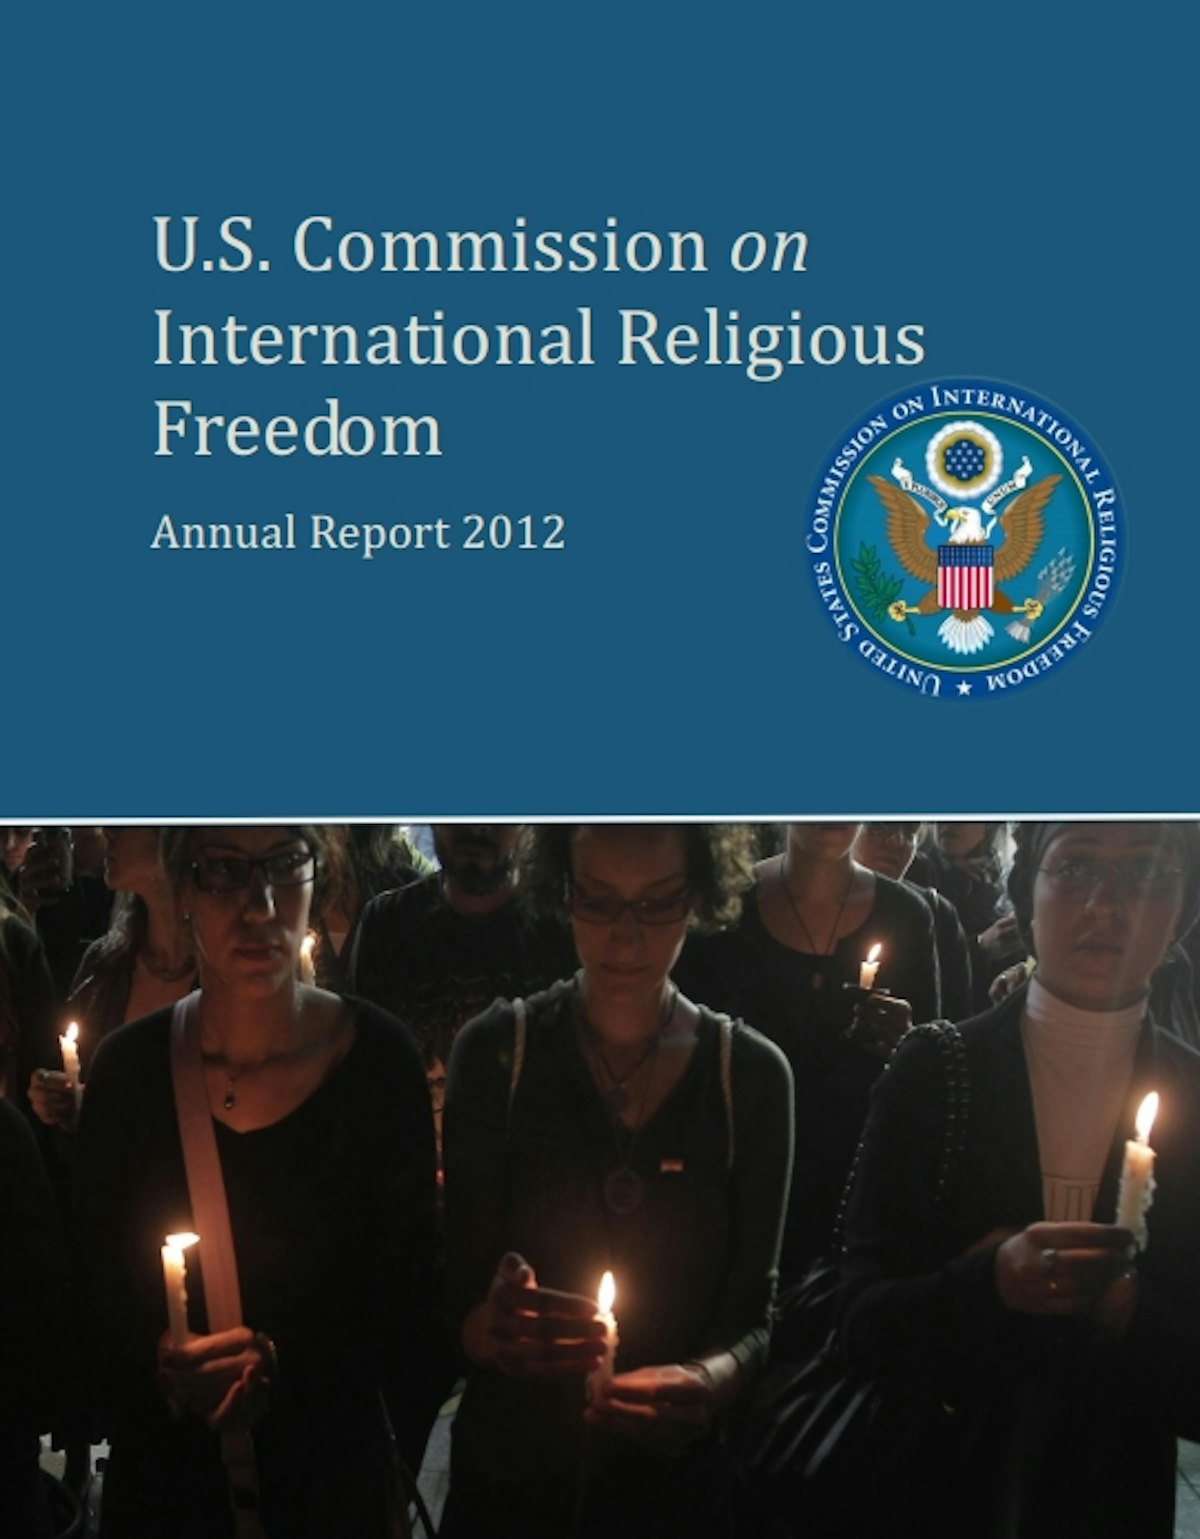 The annual report of the US Commission on International Religious Freedom (USCIRF), published on 20 March. Established in 1998 by the US Congress, the USCIRF is charged with monitoring religious freedom around the world and recommending US policy responses to violators. The Commission has identified Iran and 15 other nations as "countries of particular concern" for their poor record last year at promoting or protecting religious freedom.